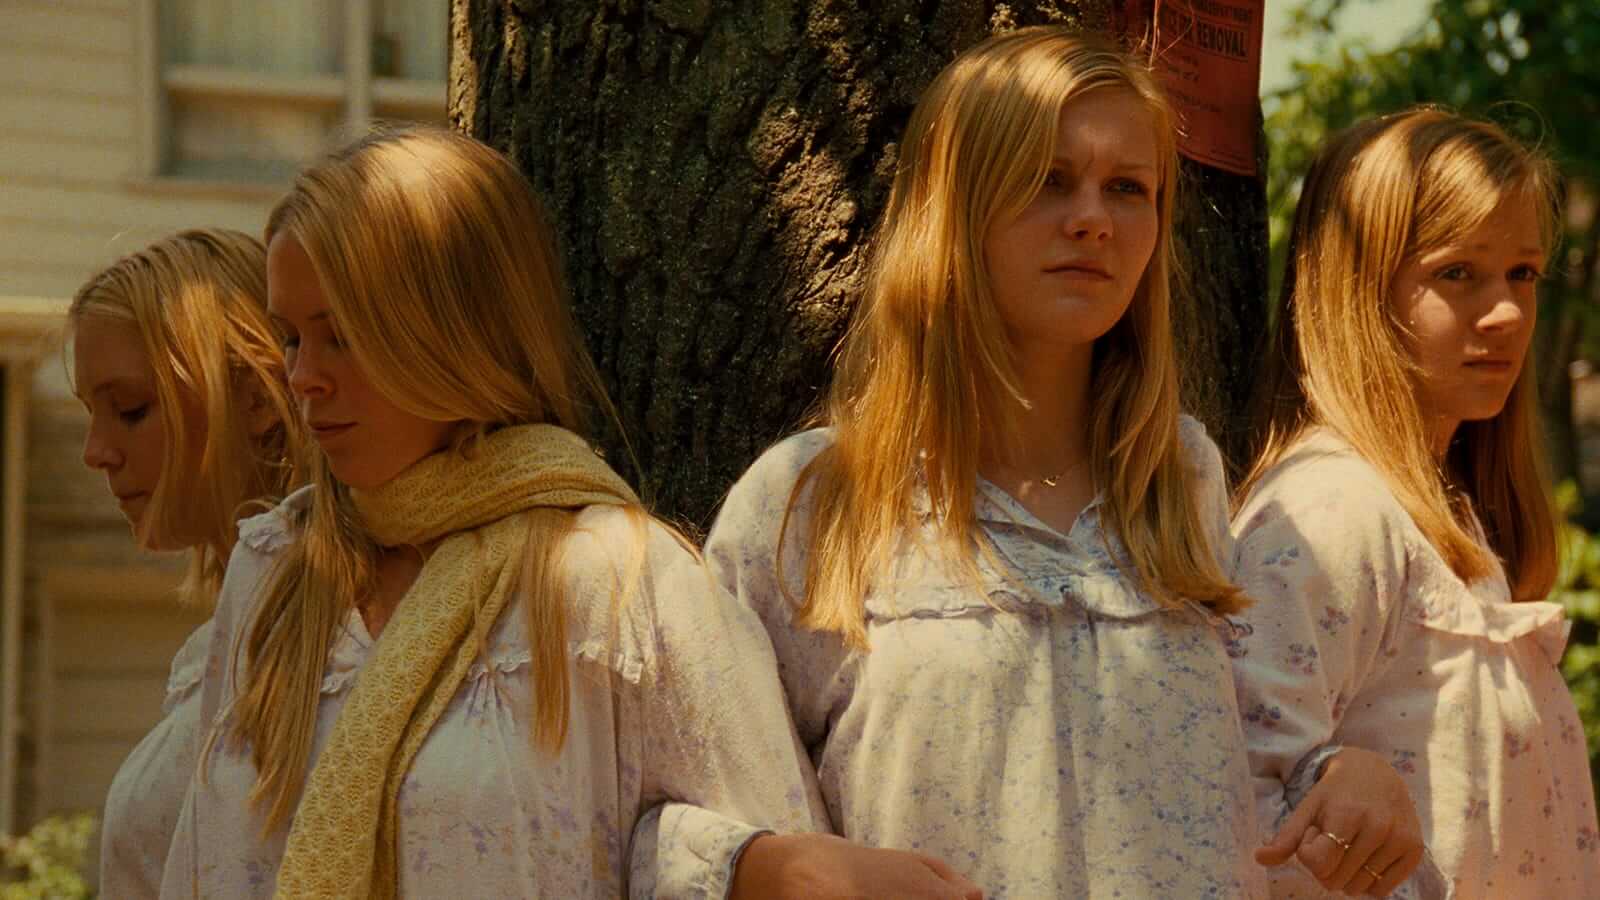 Still from The Virgin Suicides, with cinematographer Ed Lachman.